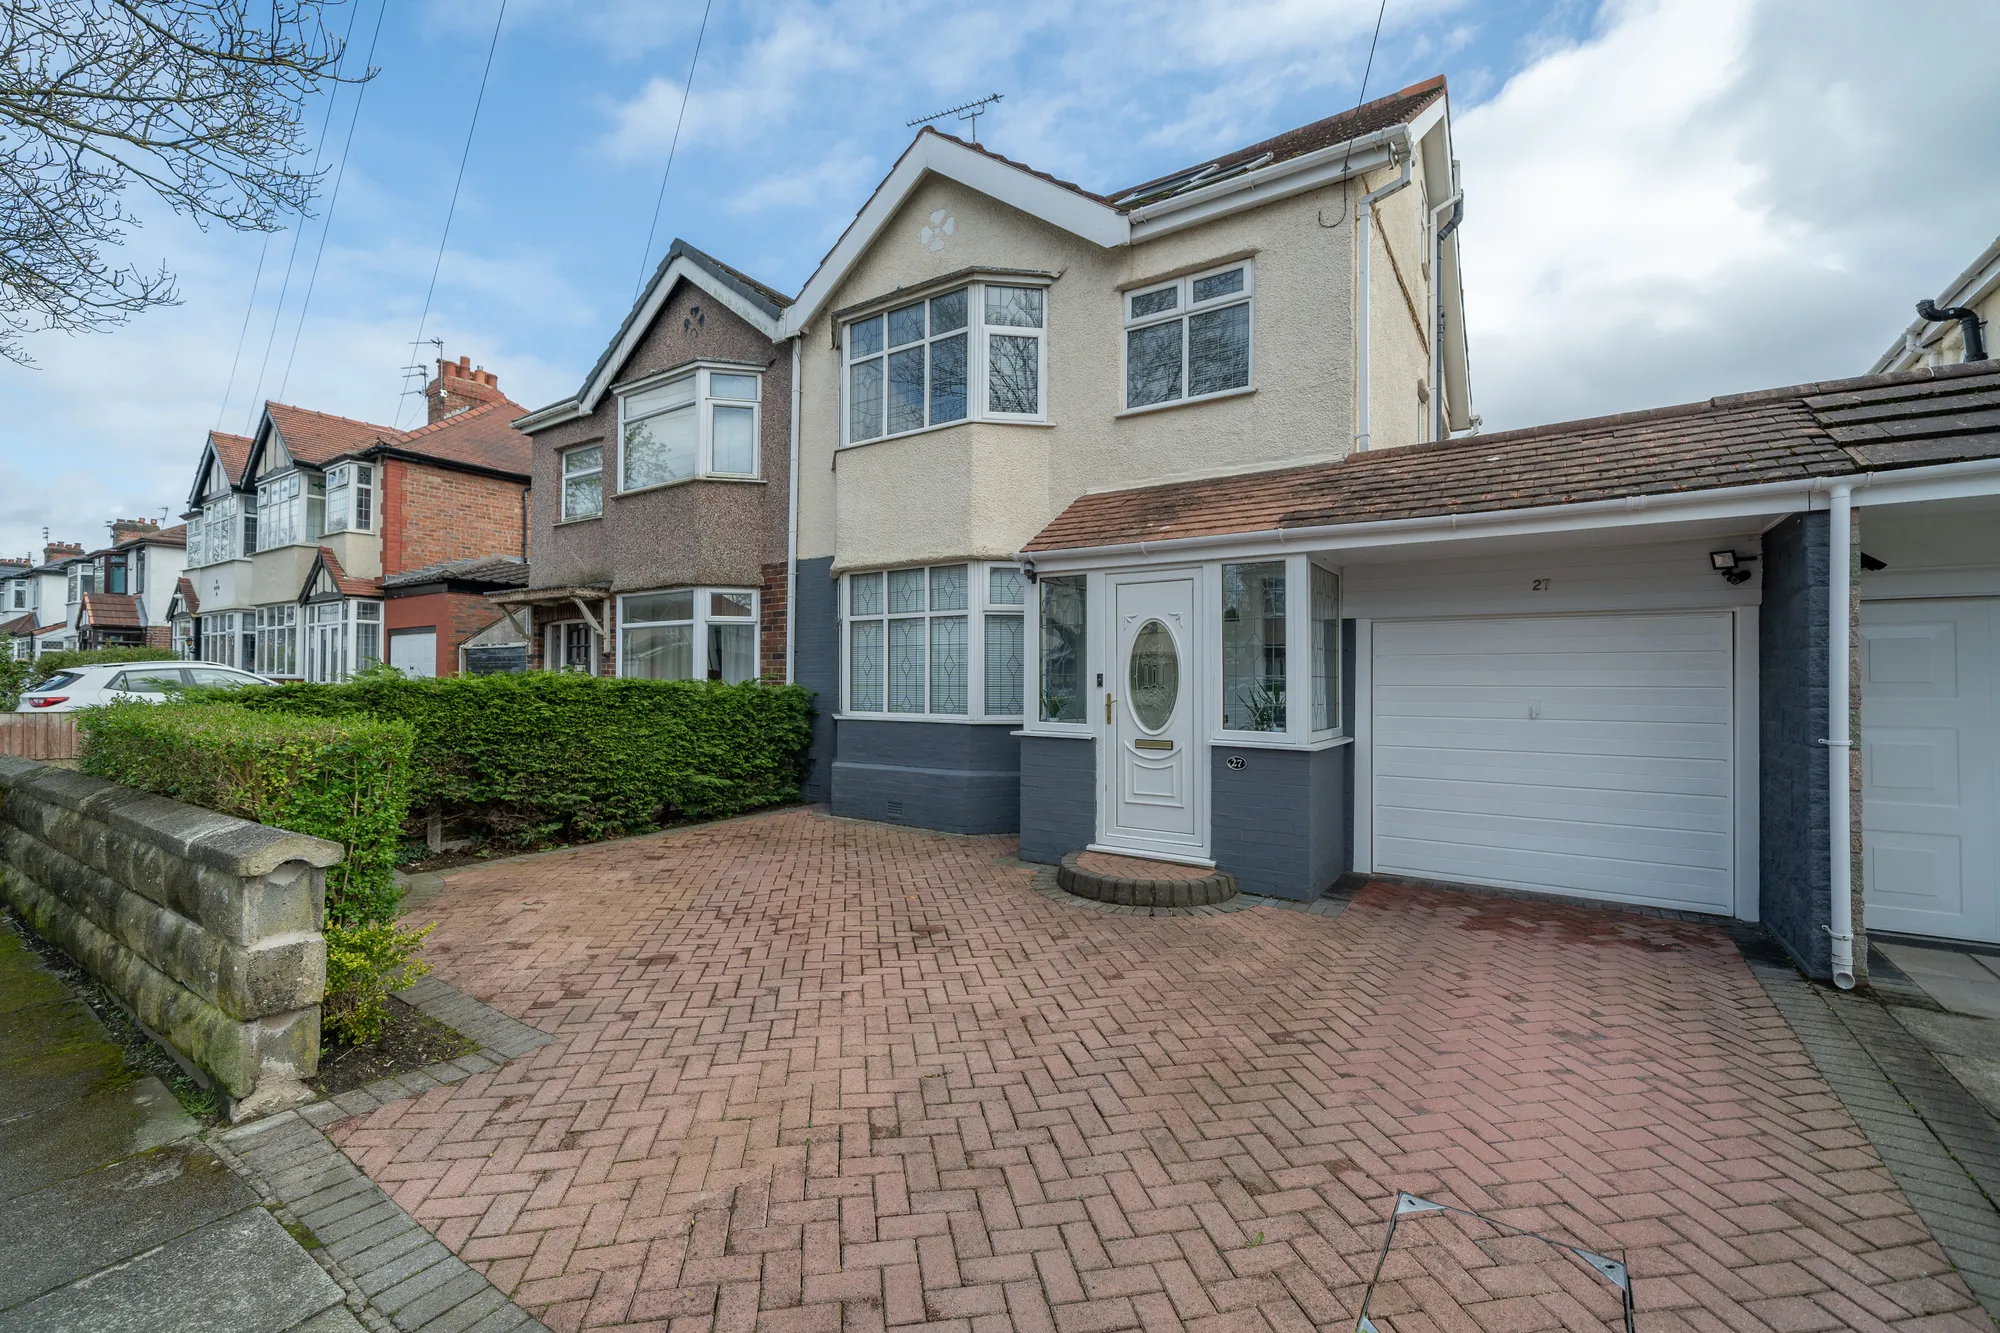 Welcome to your future dream home! Situated in the highly sought-after Claremont Avenue in Maghull, this gem of a property is a 4-bedroom semi-detached house that has been lovingly extended and has a huge South facing garden.